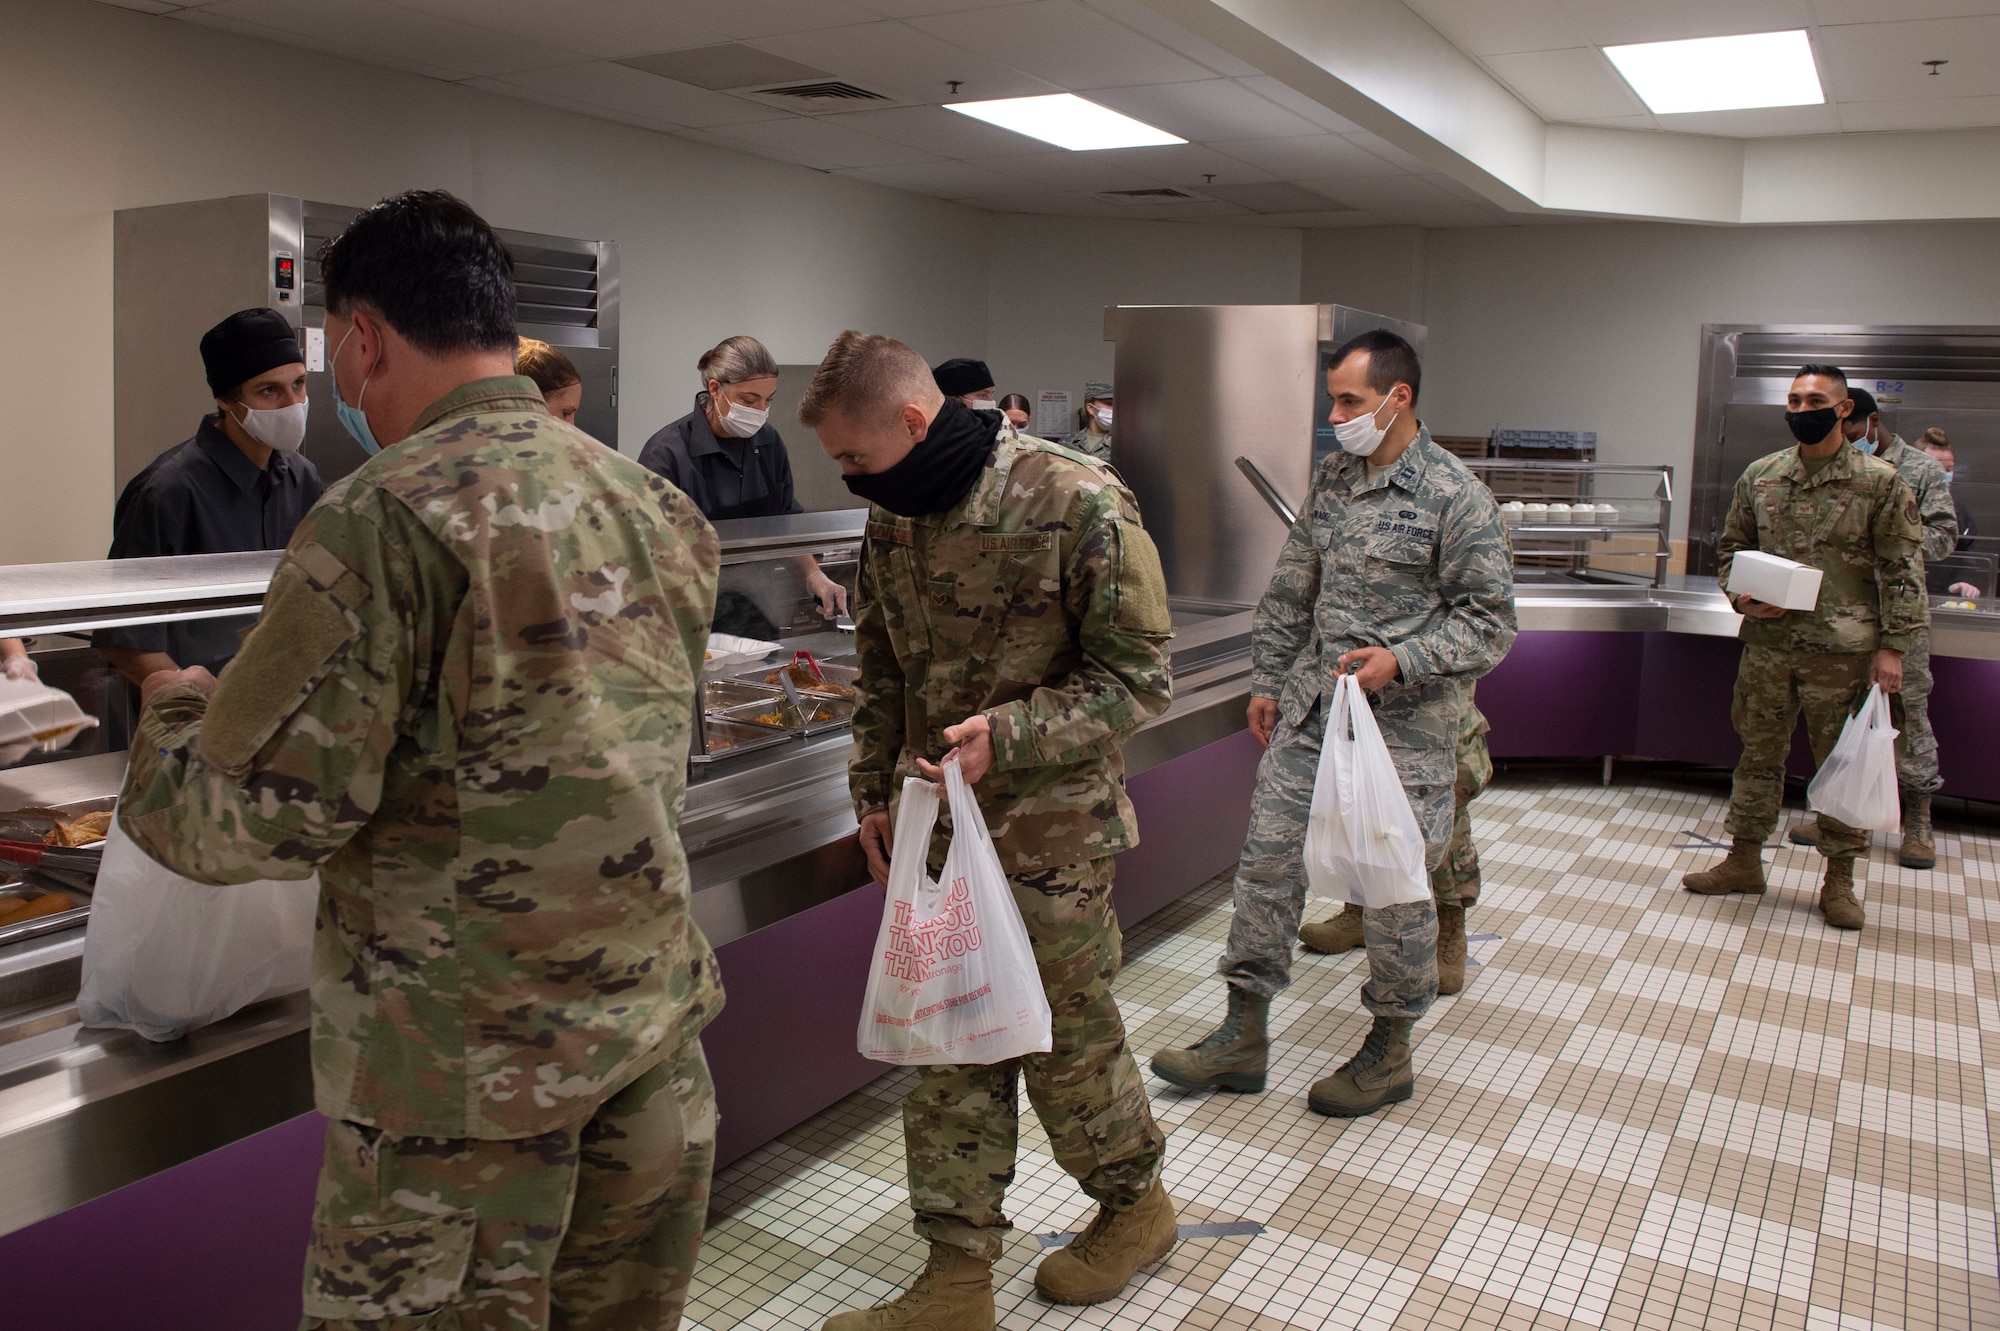 Grissom Airmen socially distance as they grab lunch to-go at the Grissom dining facility on November 8. The dining facility took many persuasions to ensure the safety of airmen assigned to Grissom, including a carry out only option for food during the unit training assembly. (U.S. Air Force Photo by Tech Sgt. Jami Lancette)